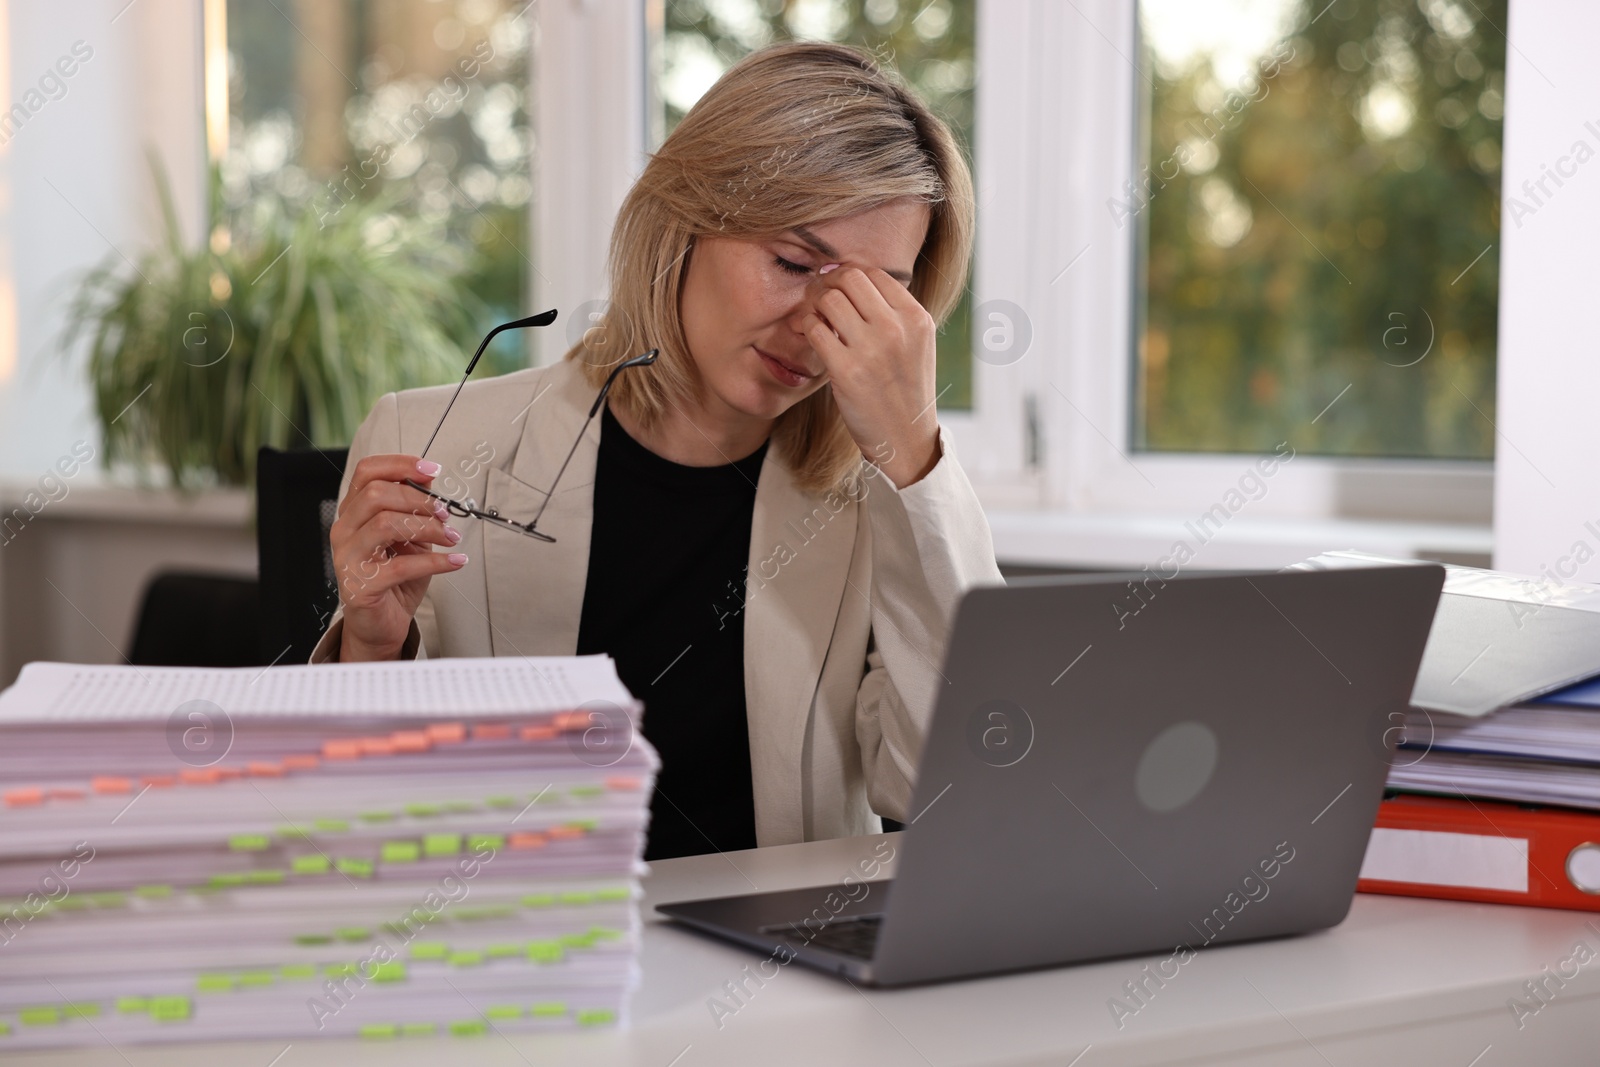 Photo of Overwhelmed woman sitting at table in office